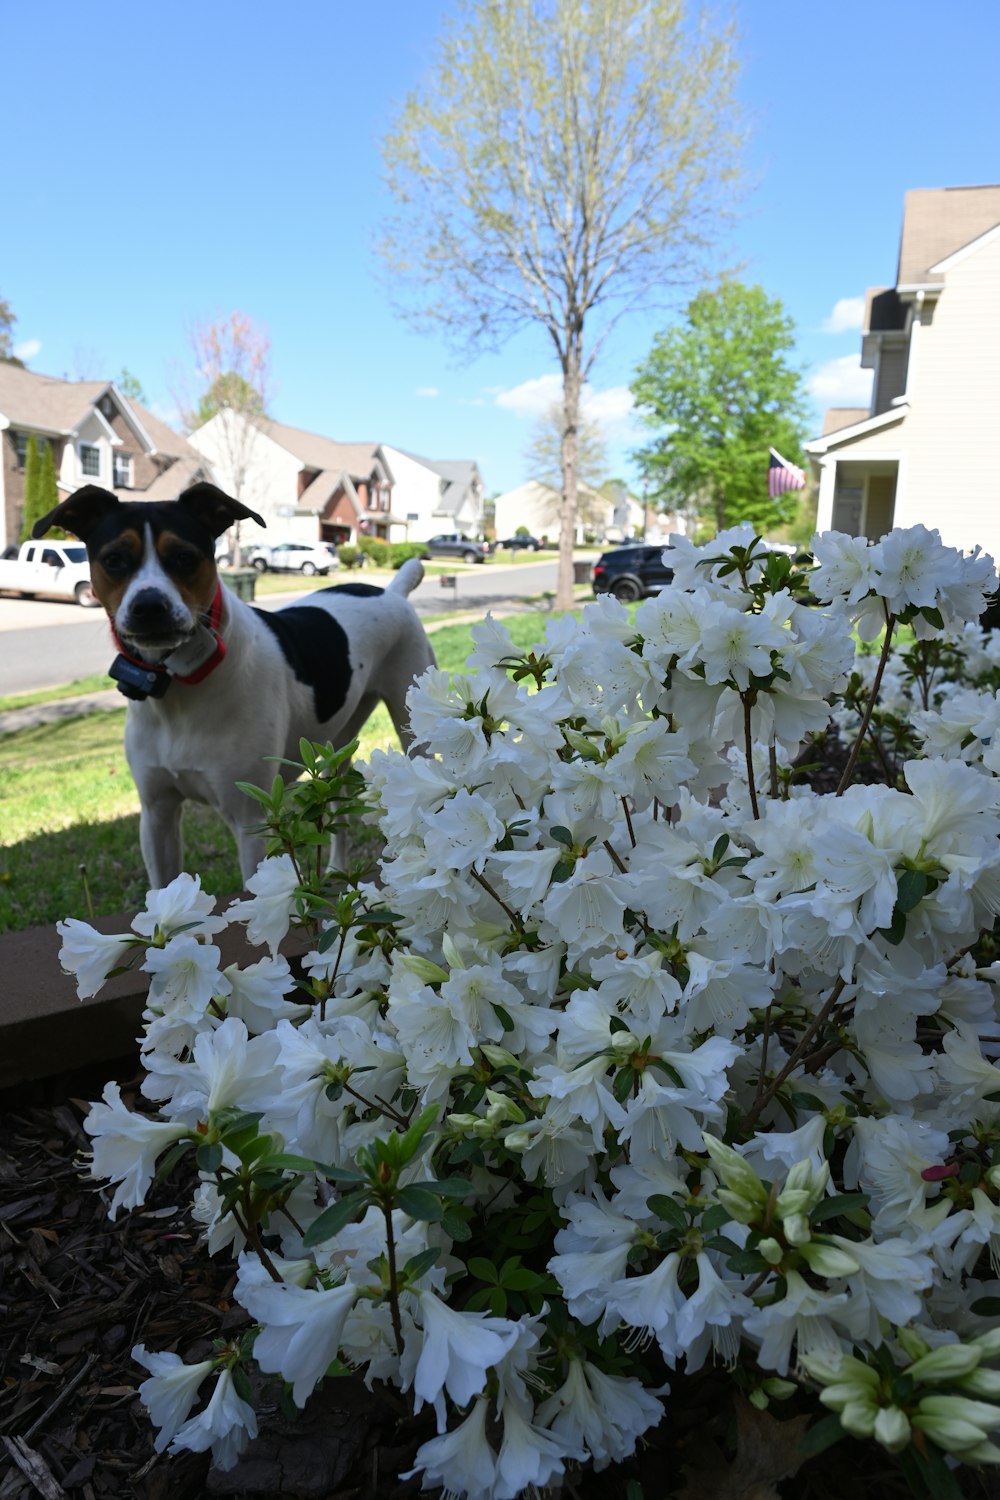 a dog standing in the middle of a flower bed